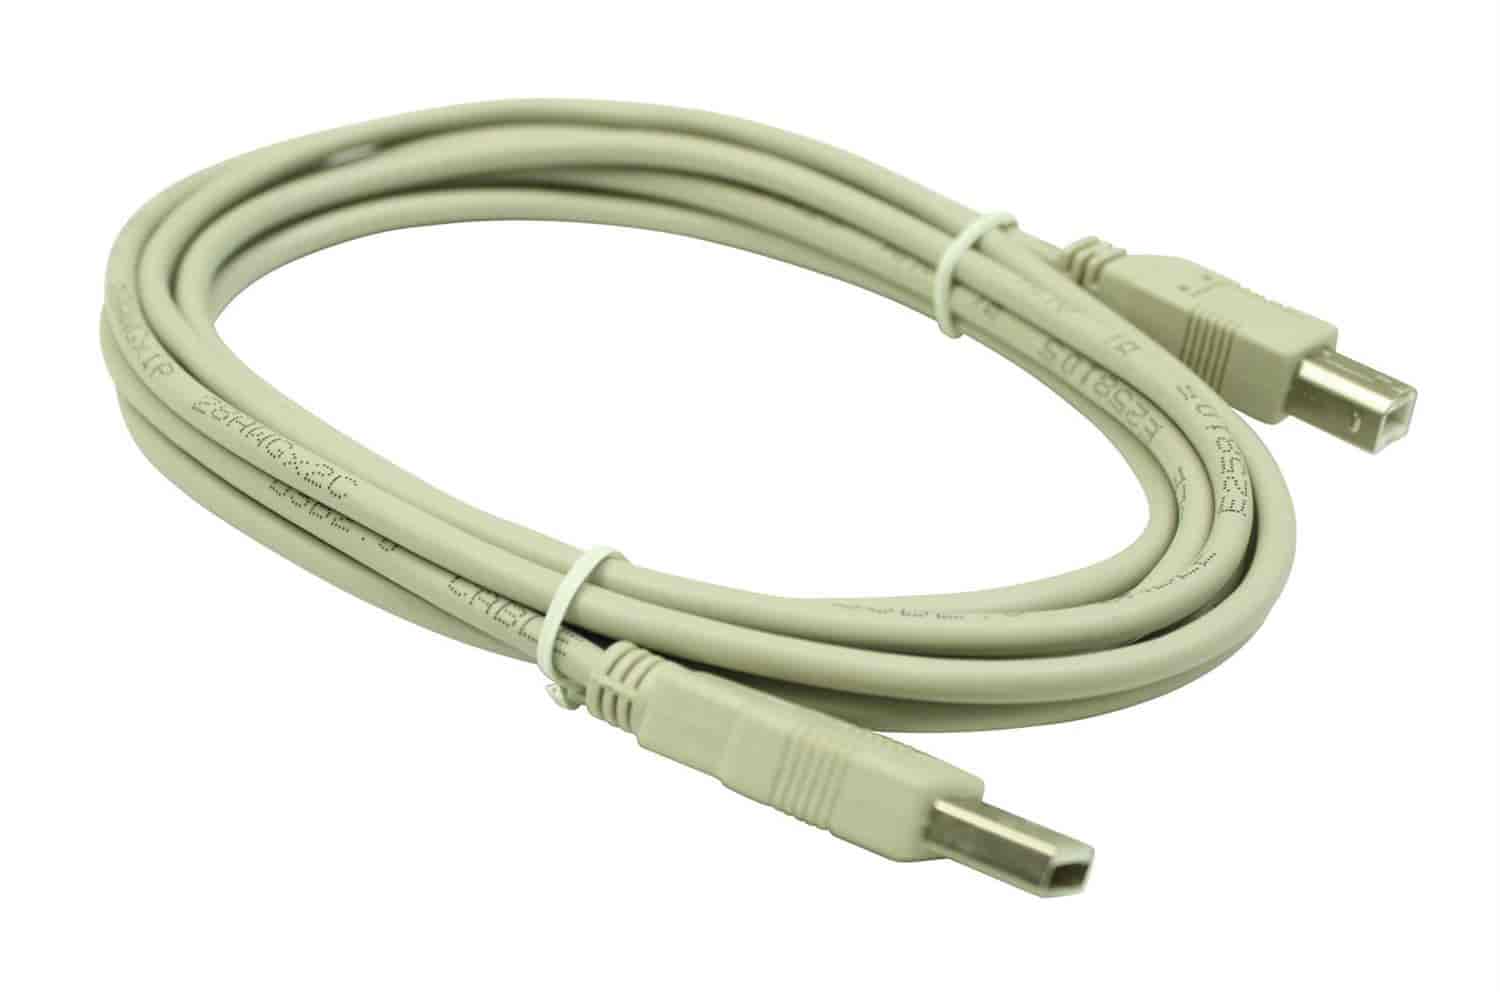 USB Comms Cable Length: 10"